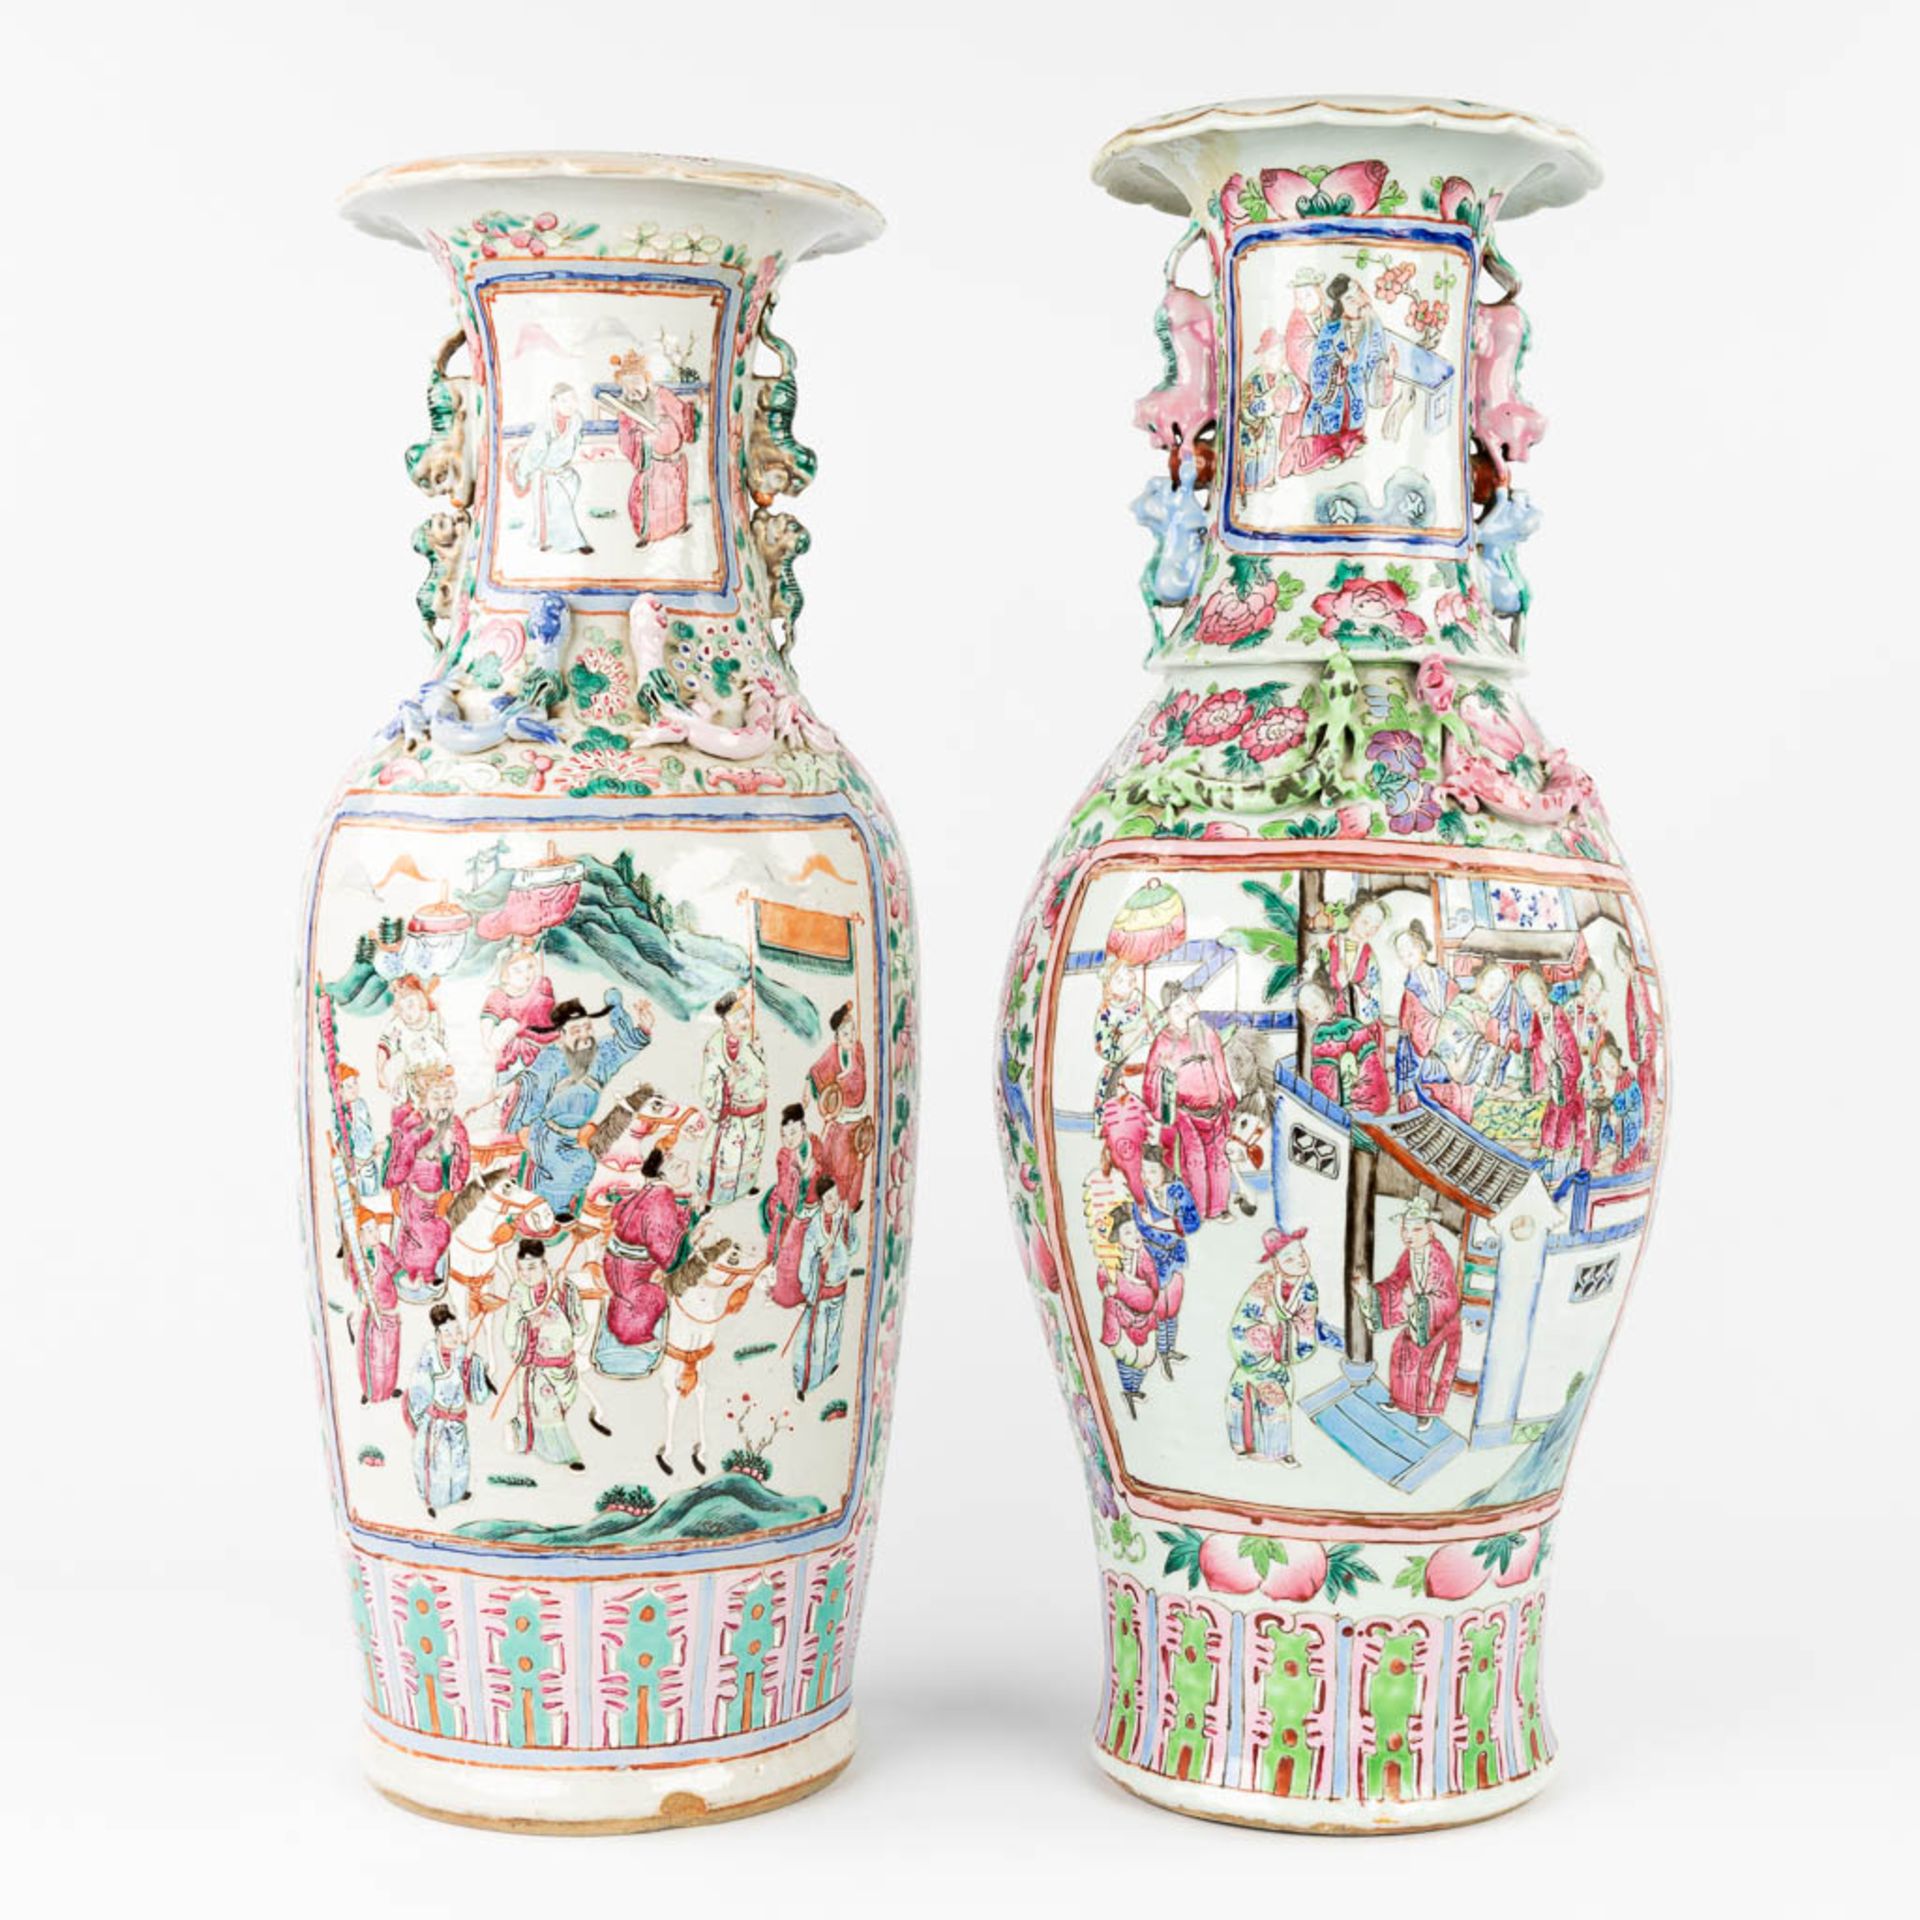 A collection of 2 Chinese vases, Famille rose. 19th/20th C. (H:65 cm) - Image 4 of 21